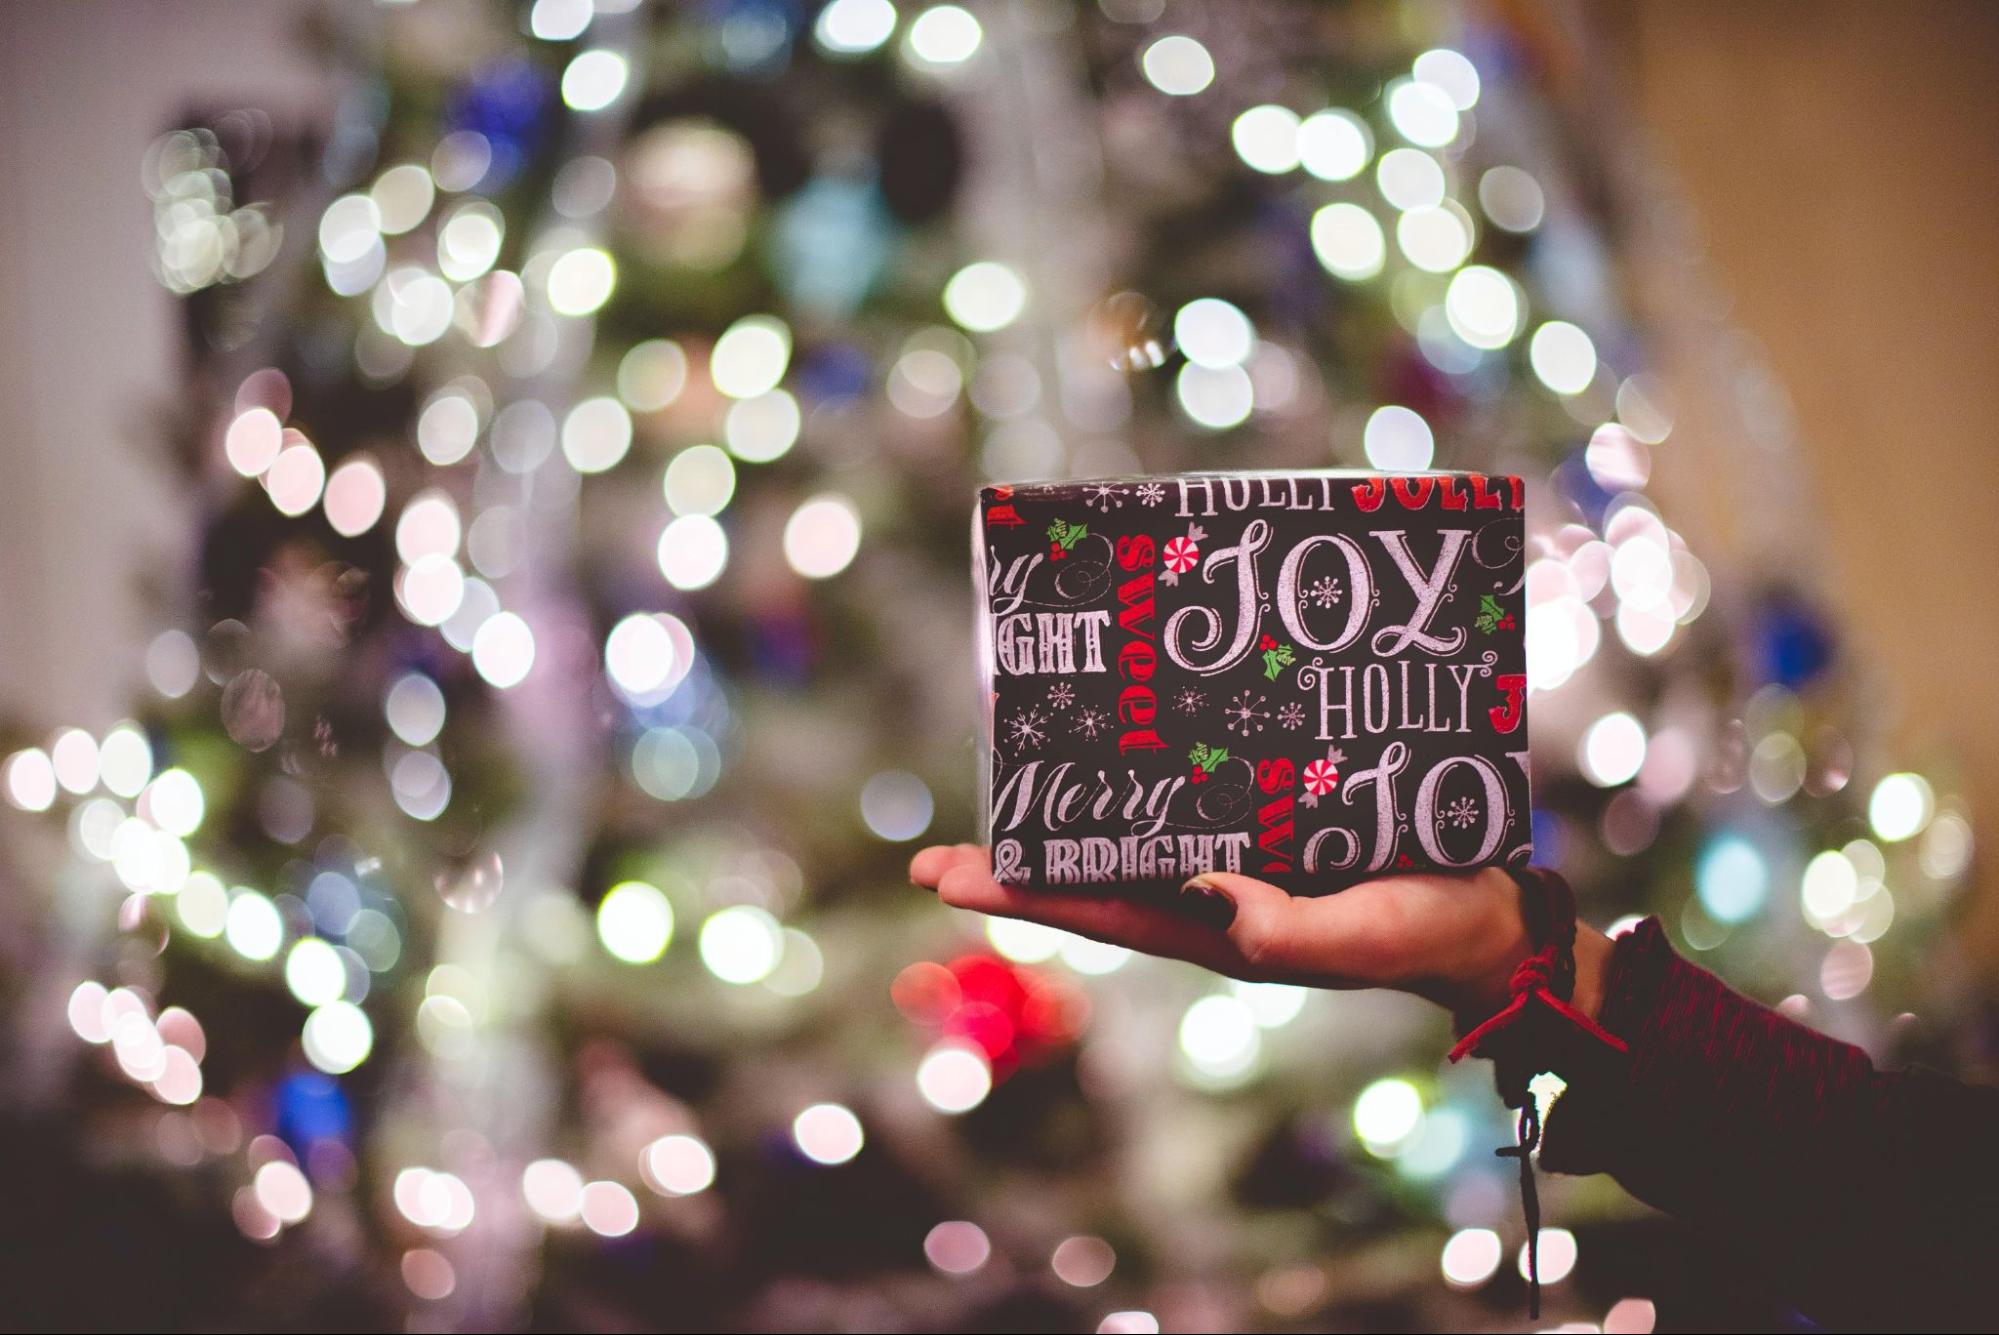 A woman holds a wrapped gift in her hand in front of a lit Christmas tree.